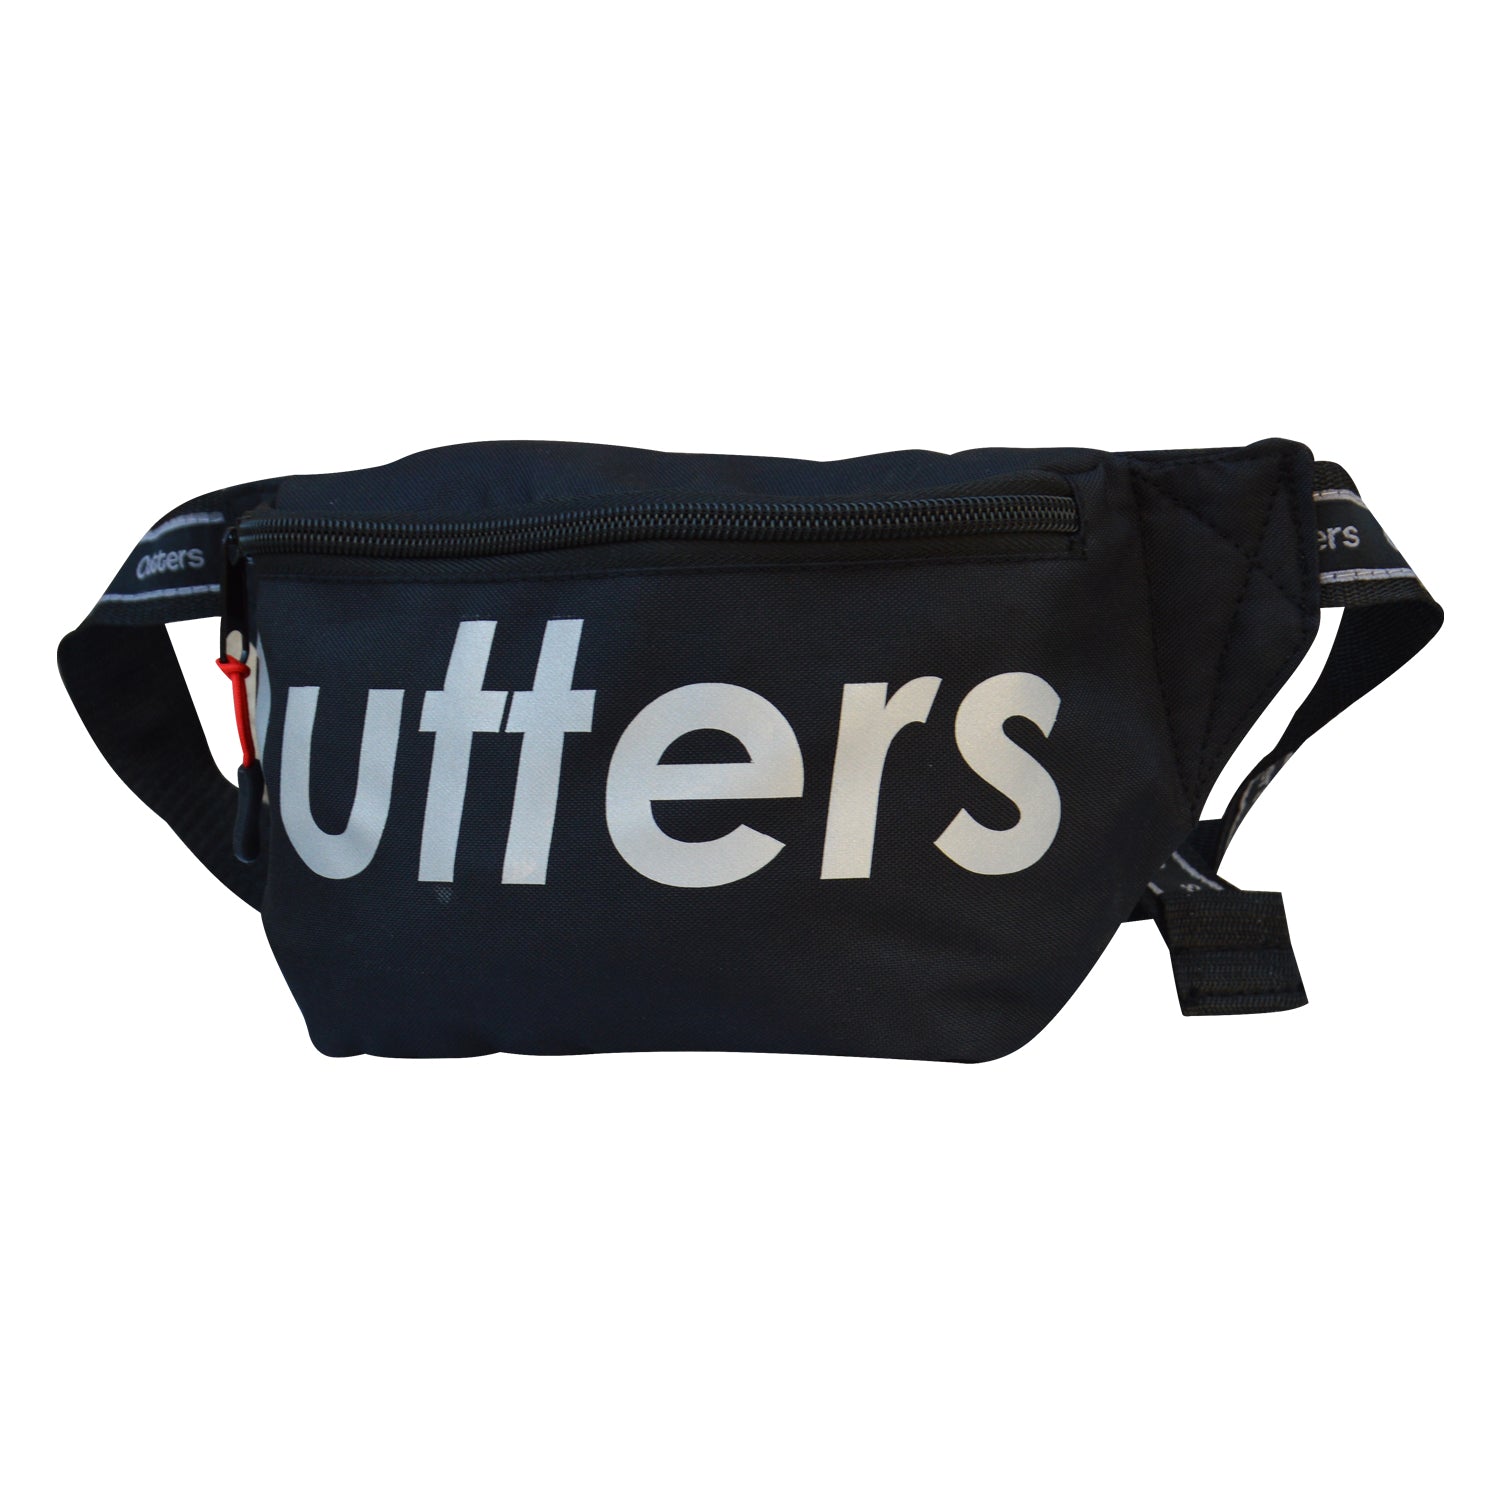 Outters Fashion Waist Bags umrah bag Sports Travel Bags – Outters Lifestyle